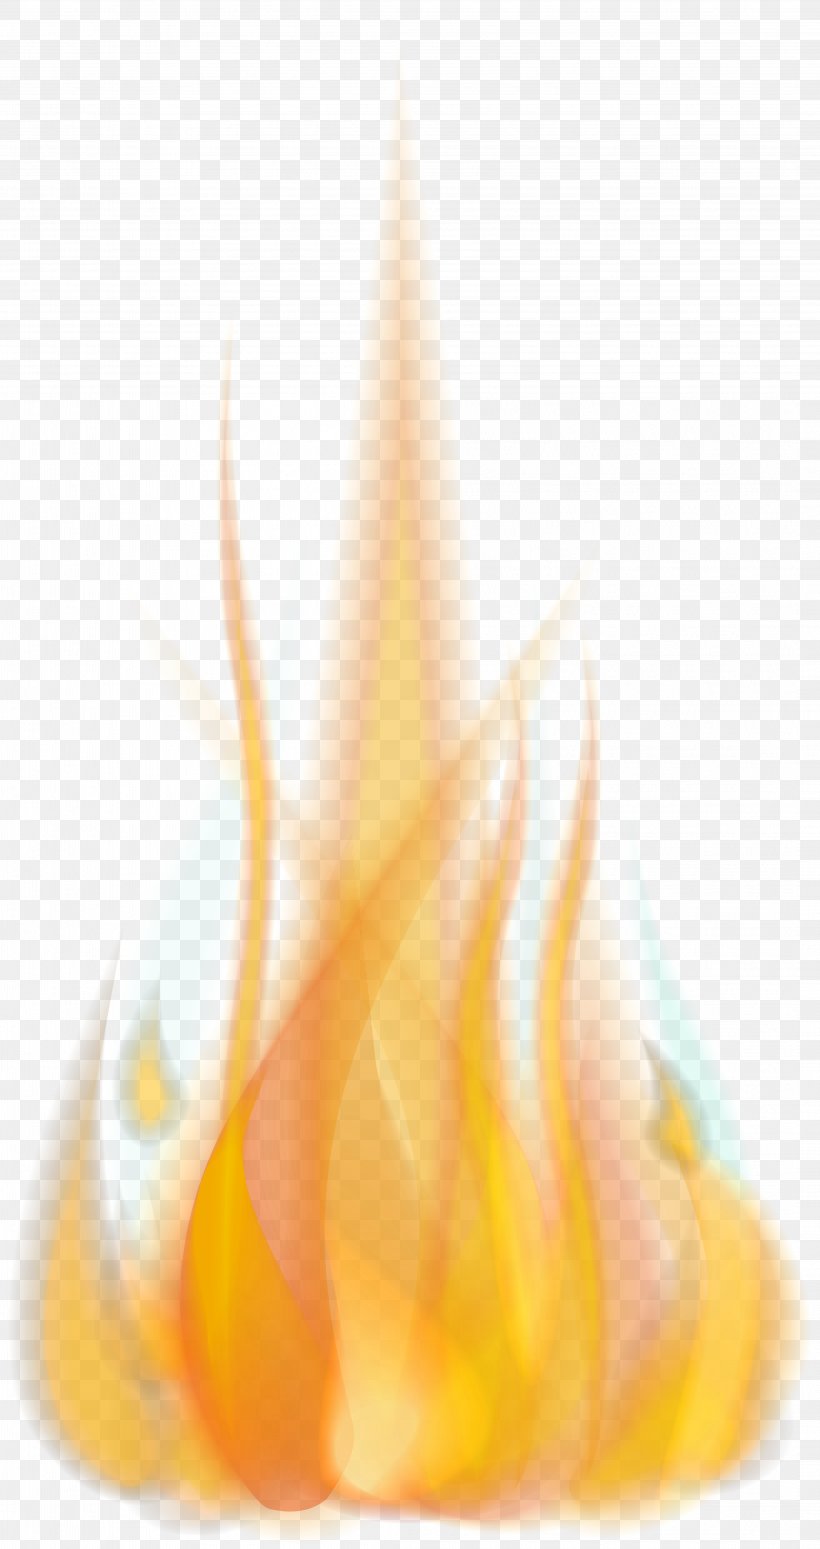 Flame Computer Wallpaper, PNG, 4233x8000px, Yellow, Computer, Flame, Illustration, Orange Download Free